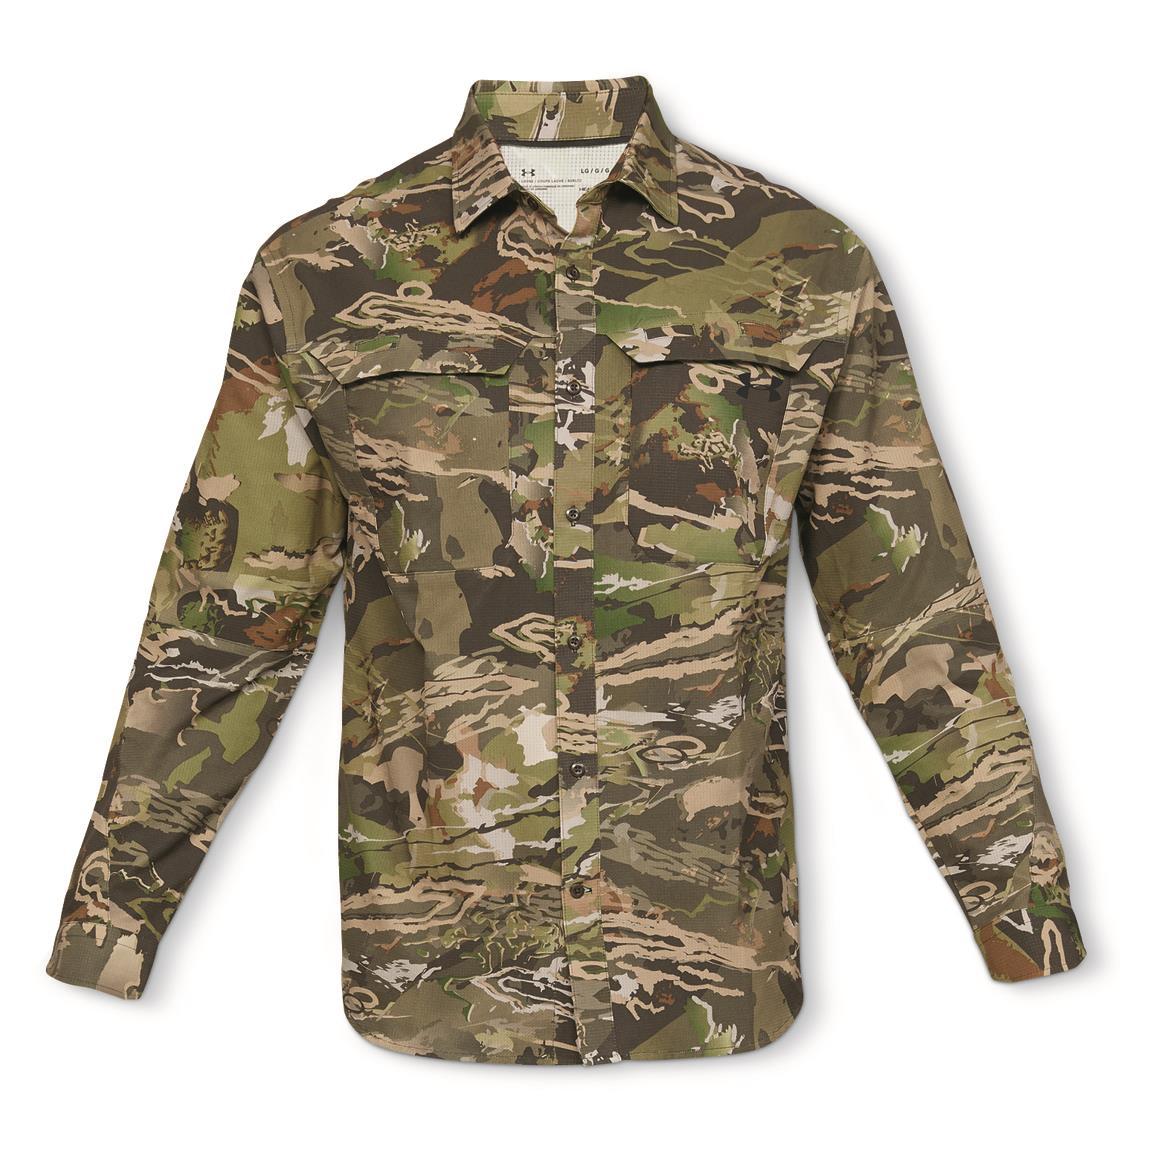 under armour long sleeve button down shirts